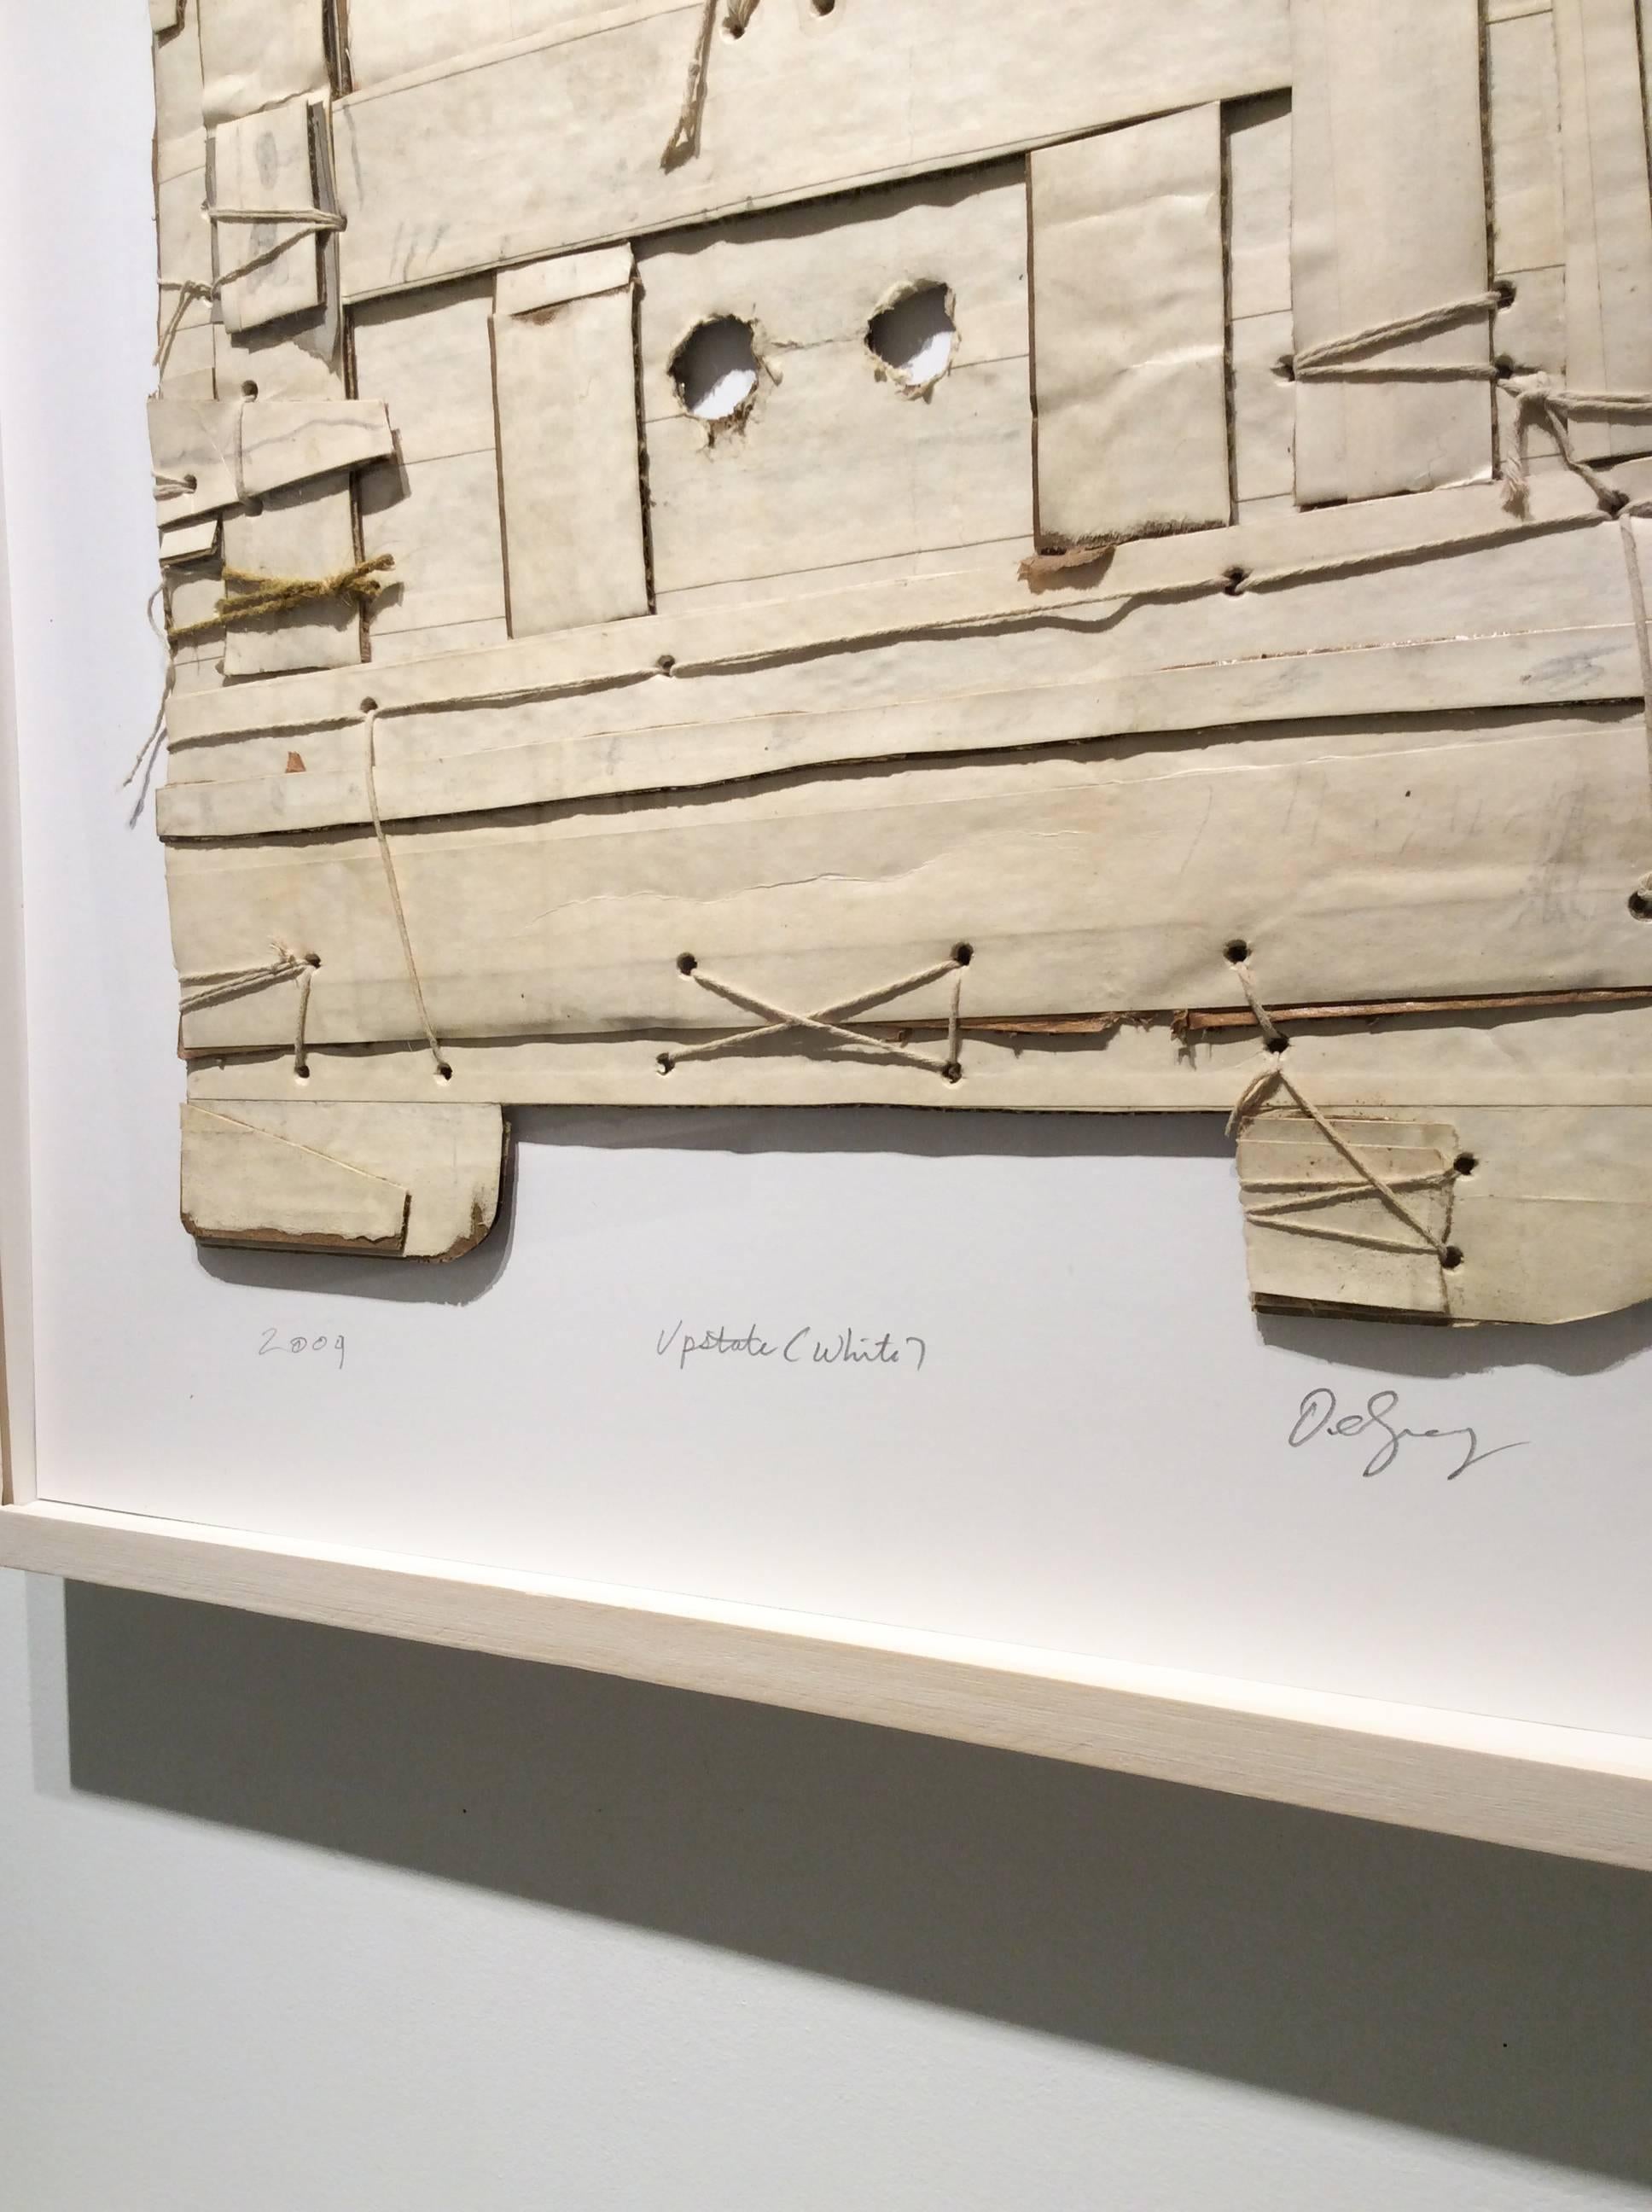 Upstate (White): Contemporary Mixed Media Cardboard Construction with String 3